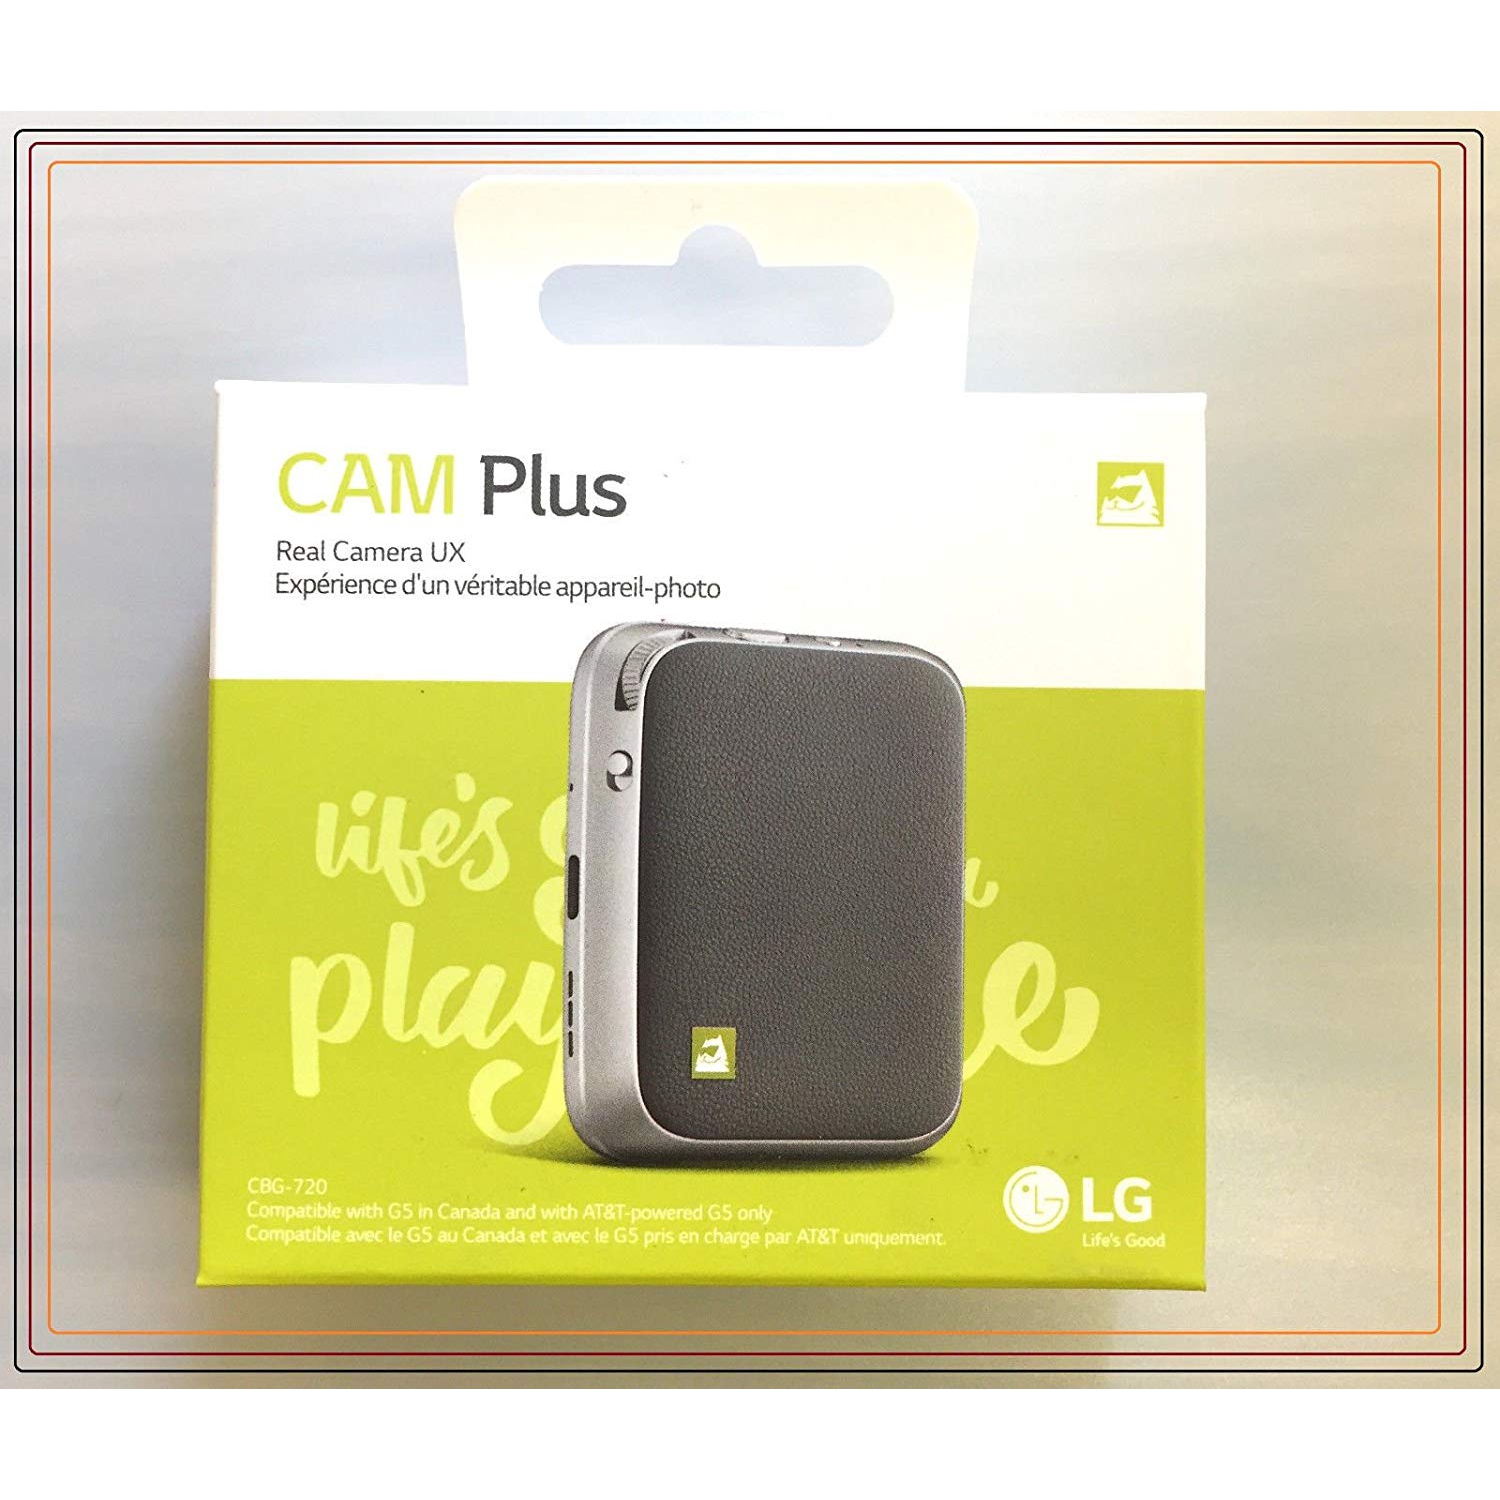 NEW-LG CAM Plus CBG-720 Camera Grip Extemded for LG G5 (H820 and H831)